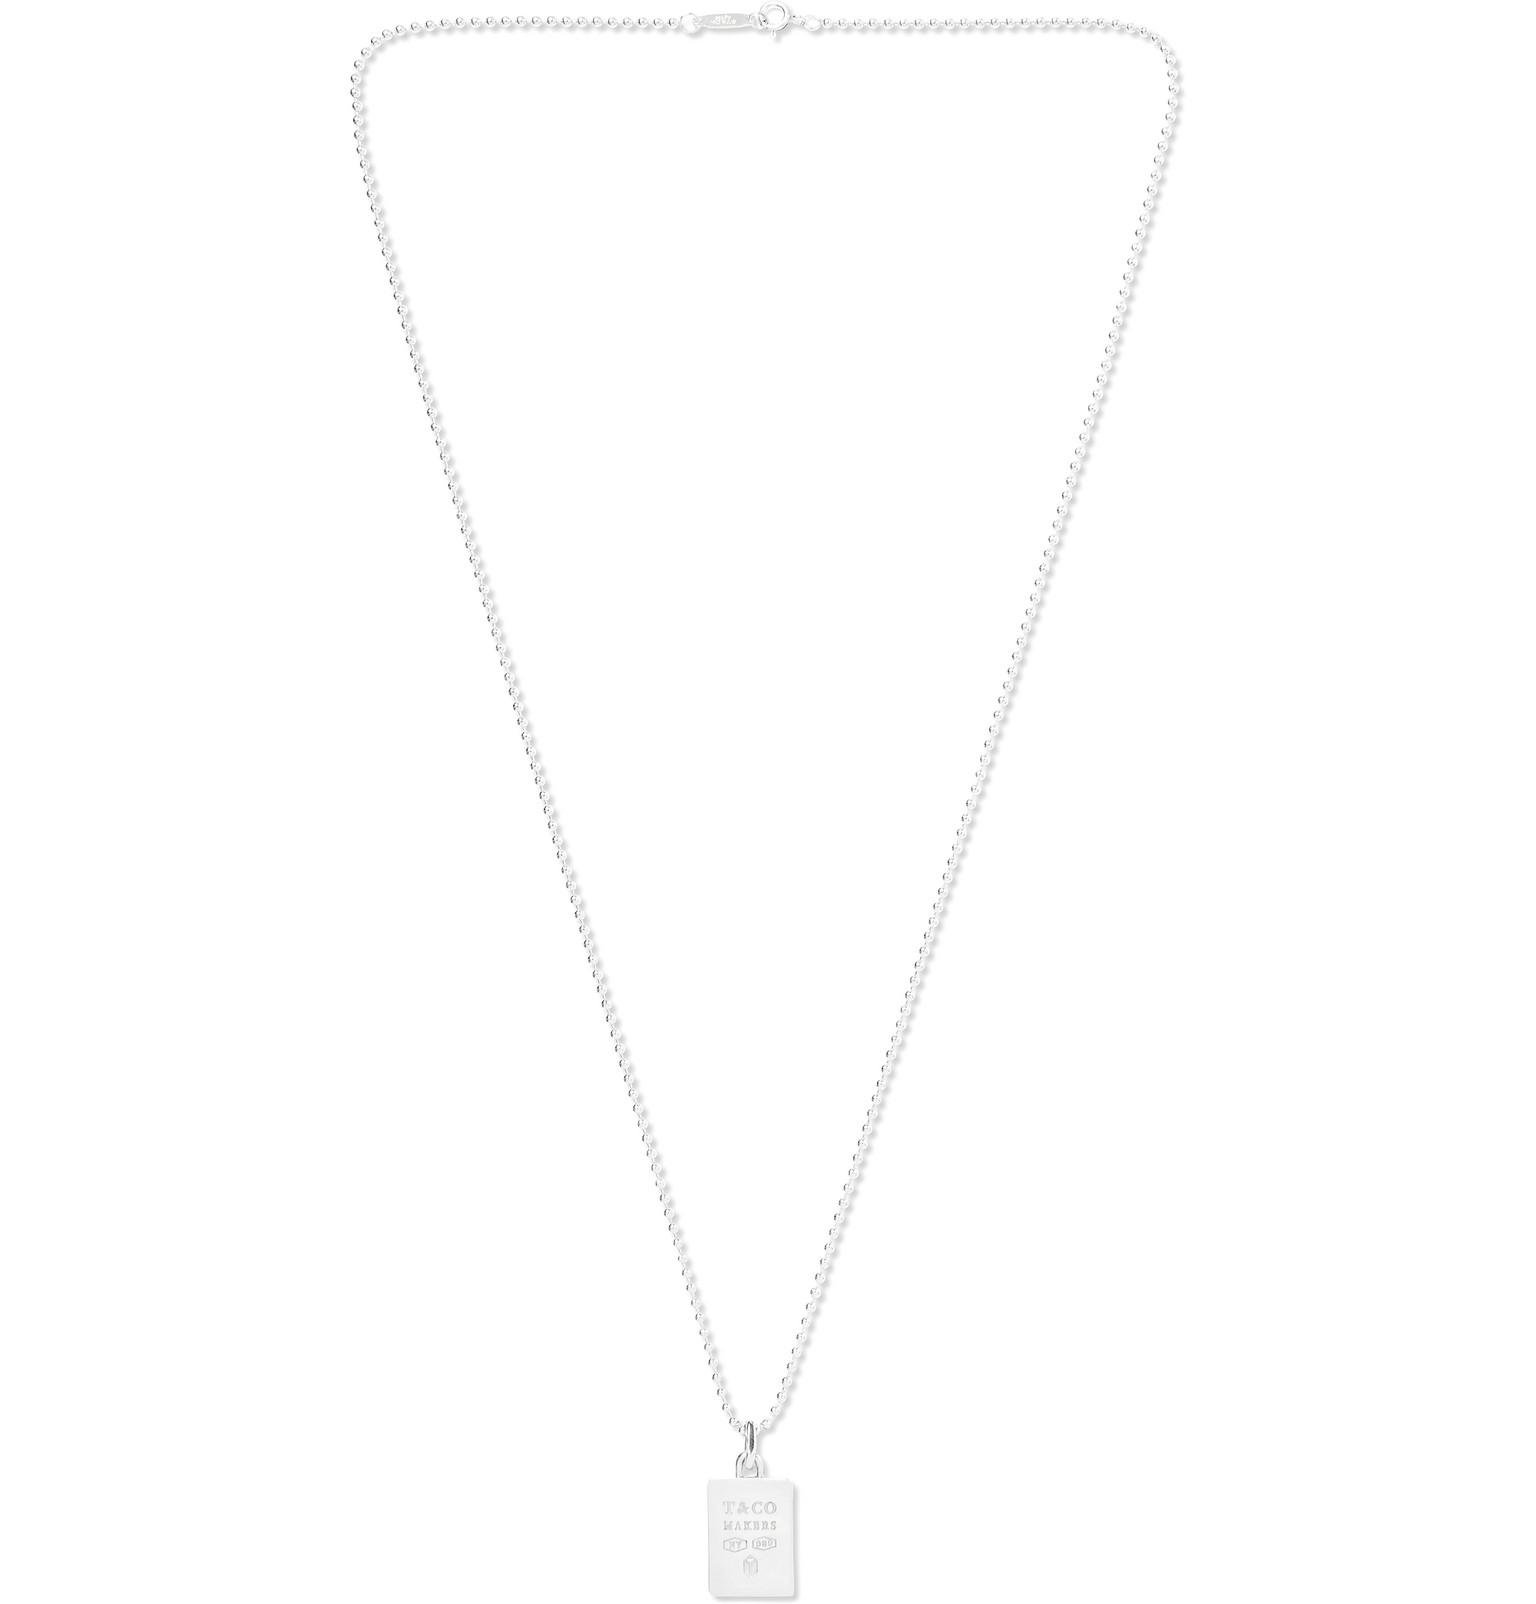 Tiffany & Co. Tiffany 1837 Makers Sterling Silver Necklace in Metallic ...